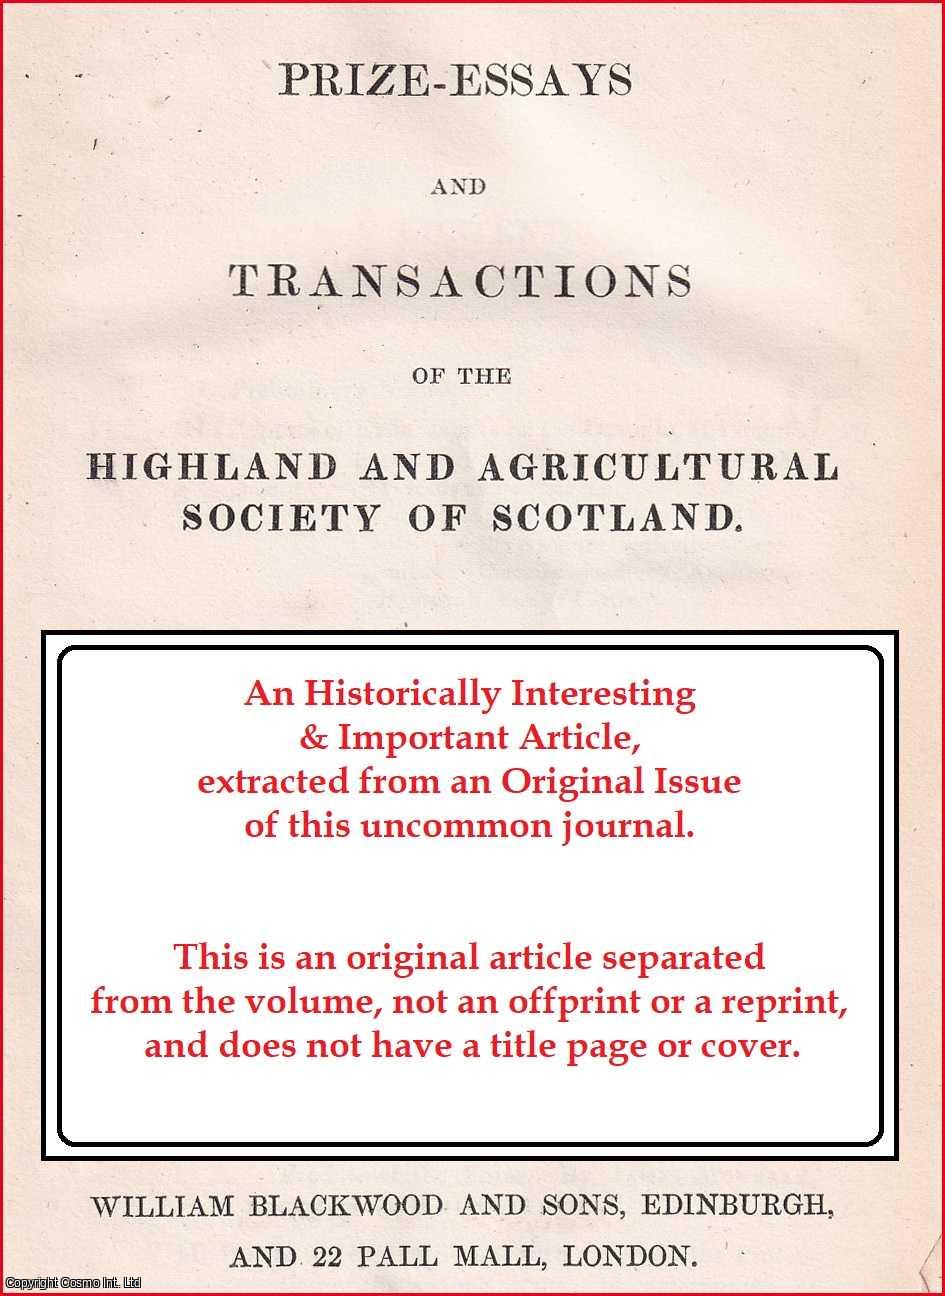 Reverend Principal Baird - Description of a Hand-Thrashing Machine. An uncommon original article from the Prize Essays and Transactions of the Highland Society of Scotland, 1831.